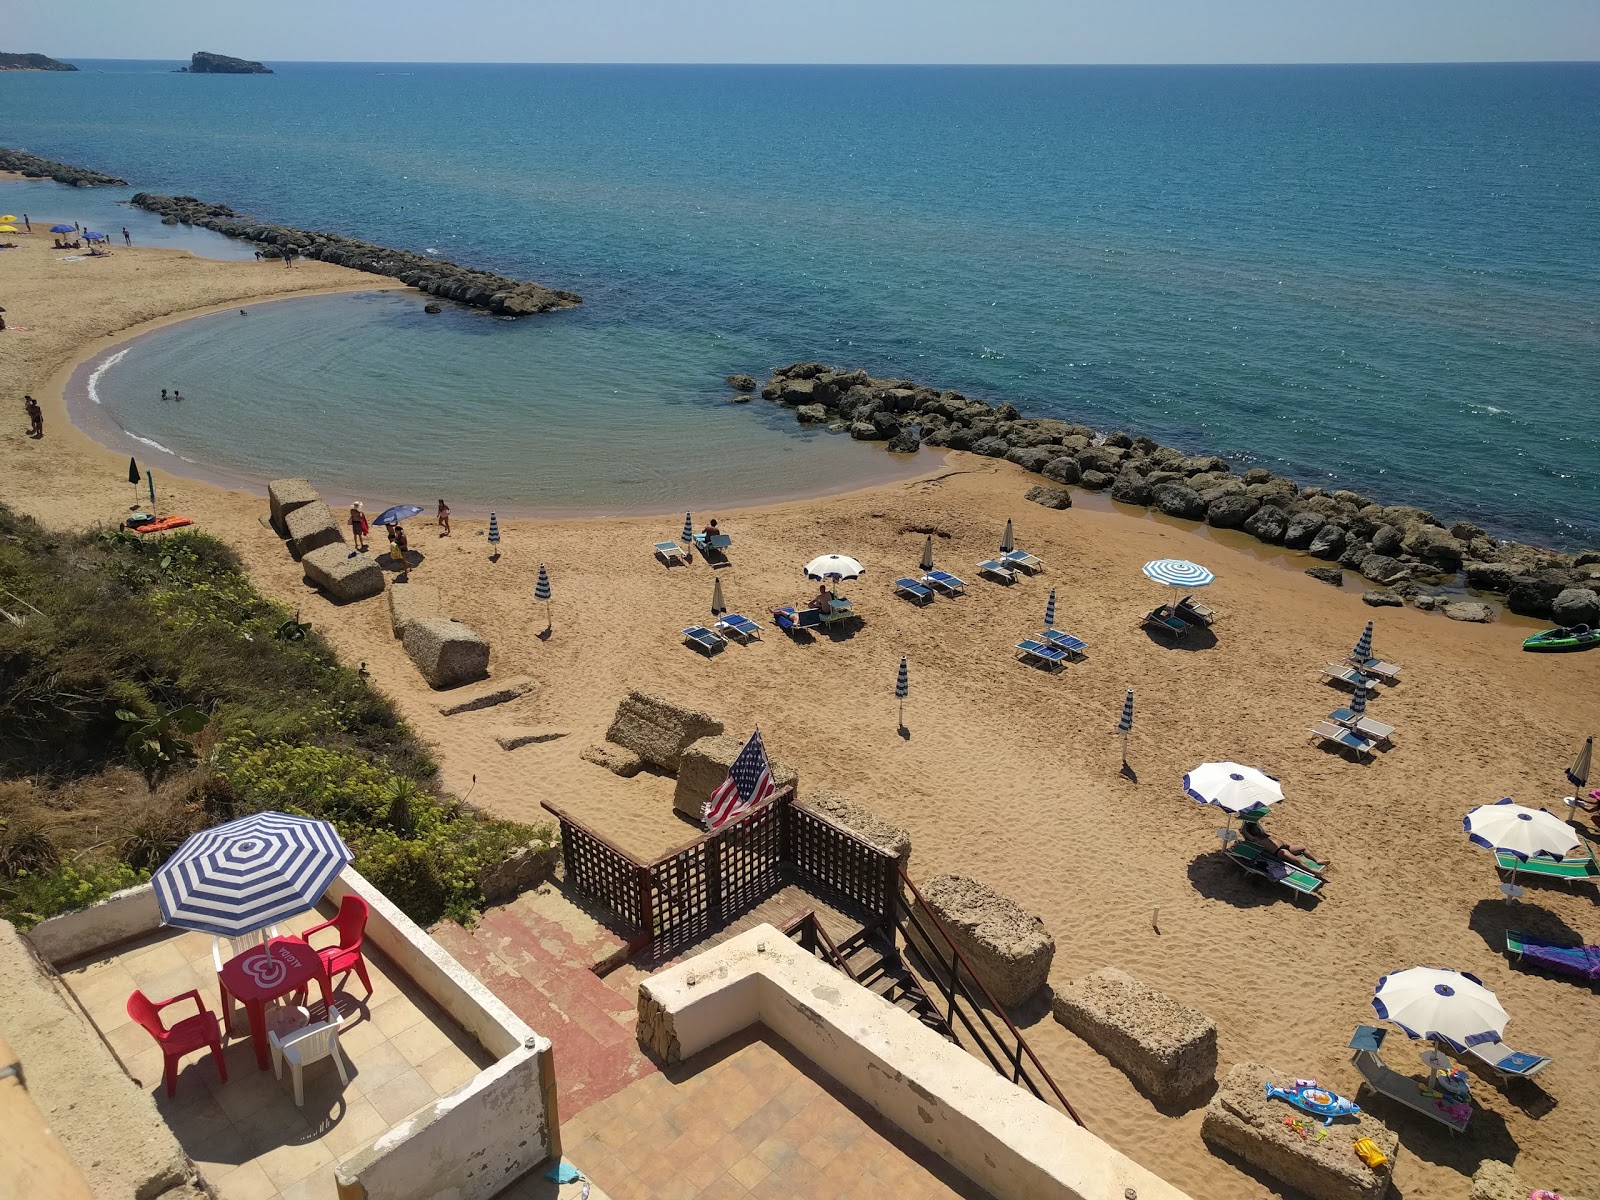 Photo of Lido Le Piscine - popular place among relax connoisseurs